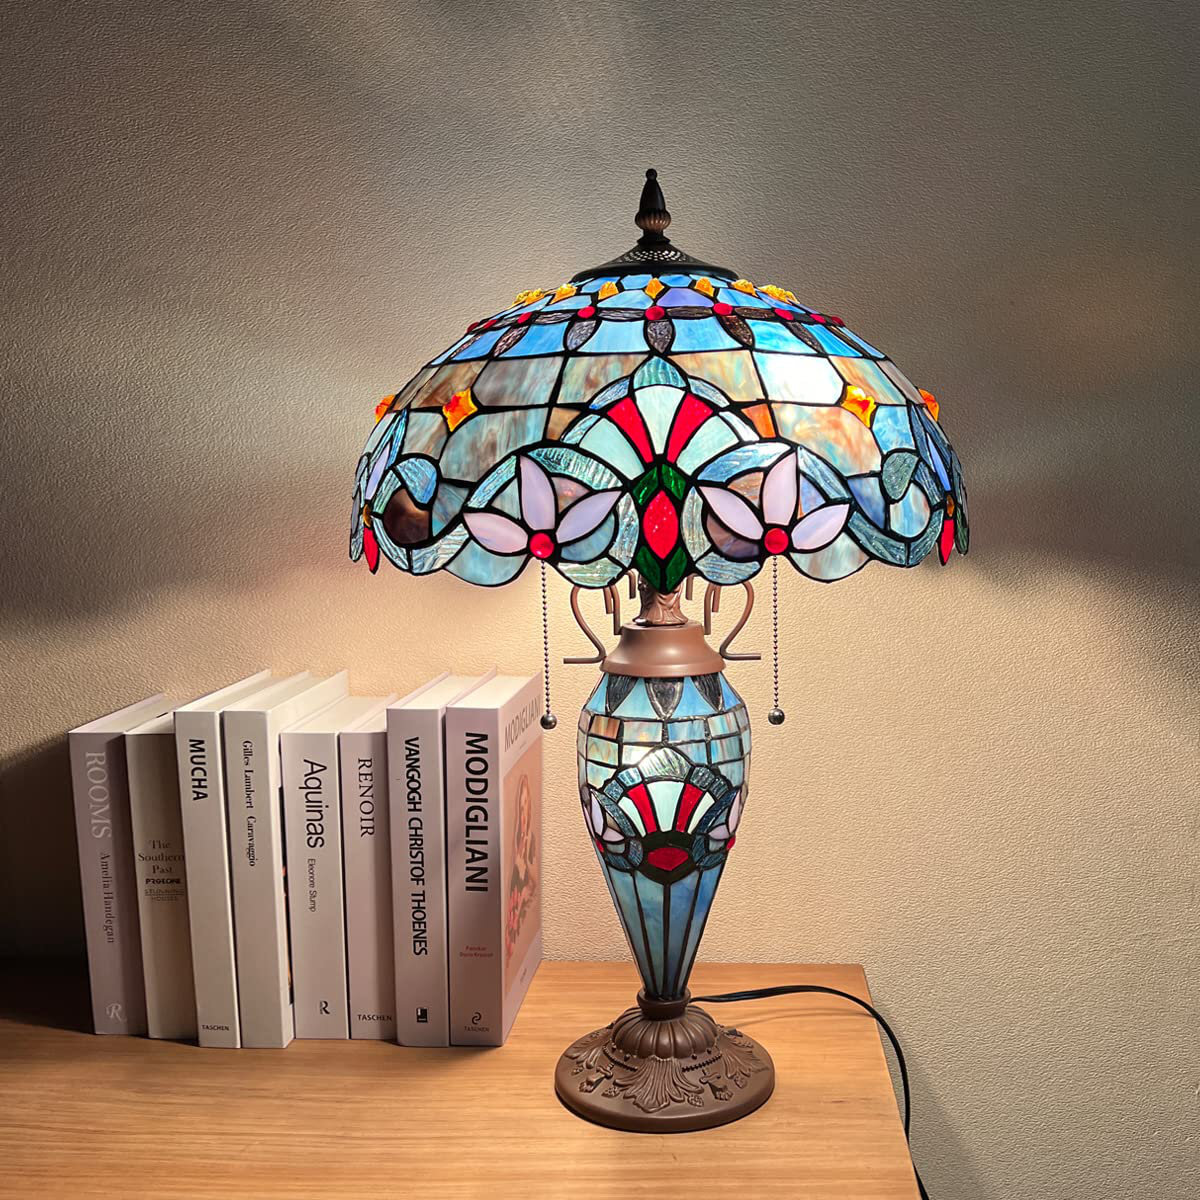 Tiffany Large Table Lamp 3-Light With Nightlight Rustic Victorian Style Desk Light